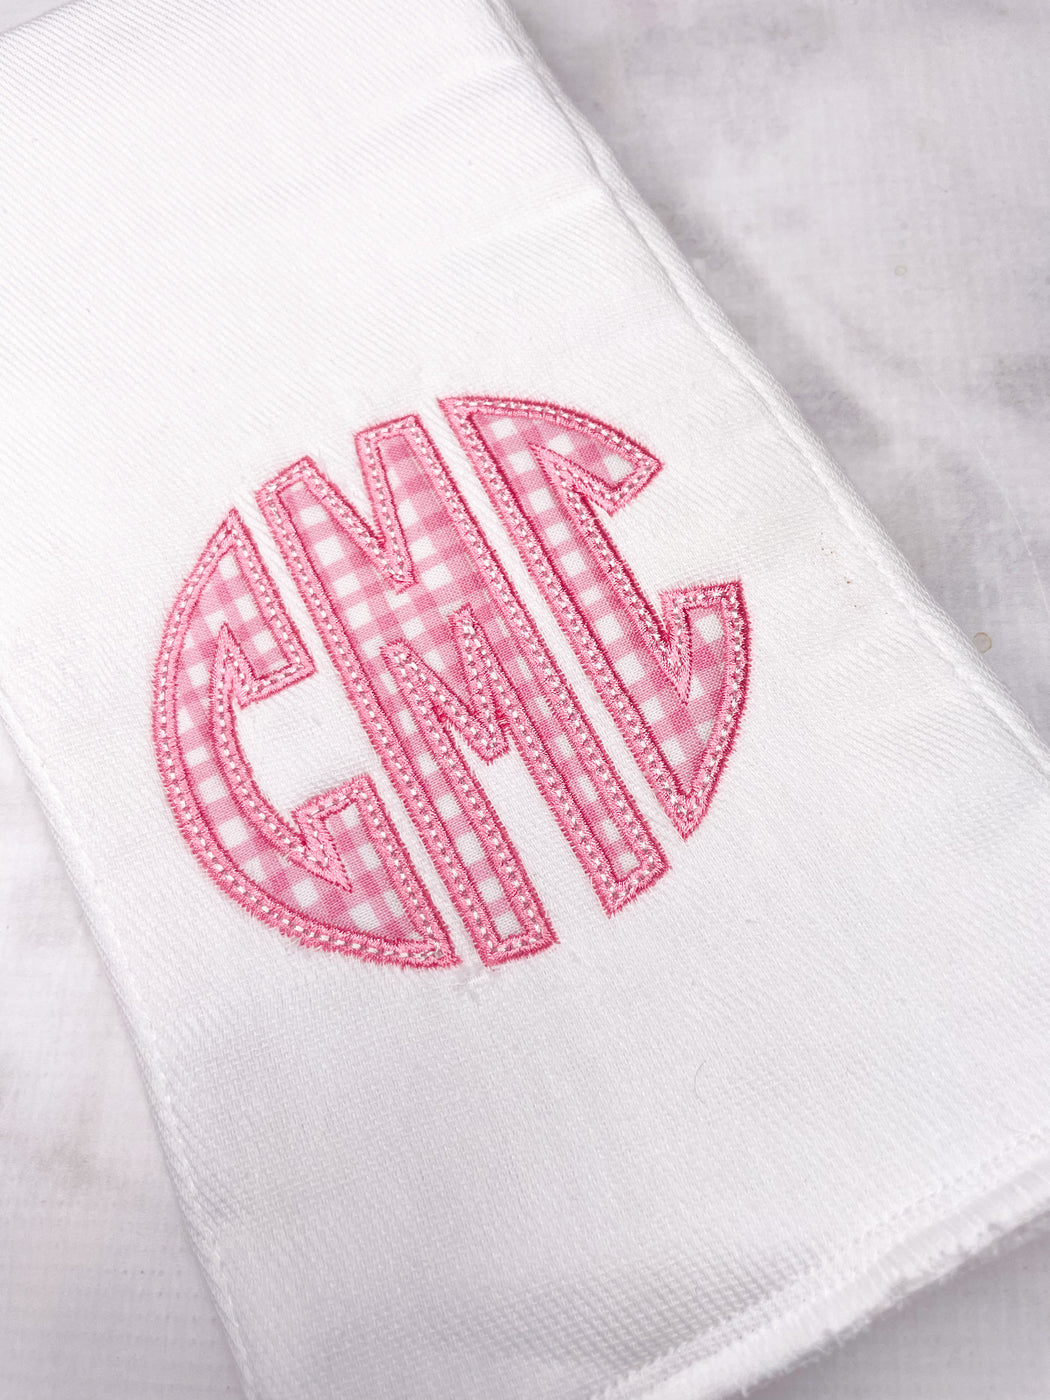 Baby Girl Personalized Monogrammed Burp Cloth Set of 2 - Sea Turtles